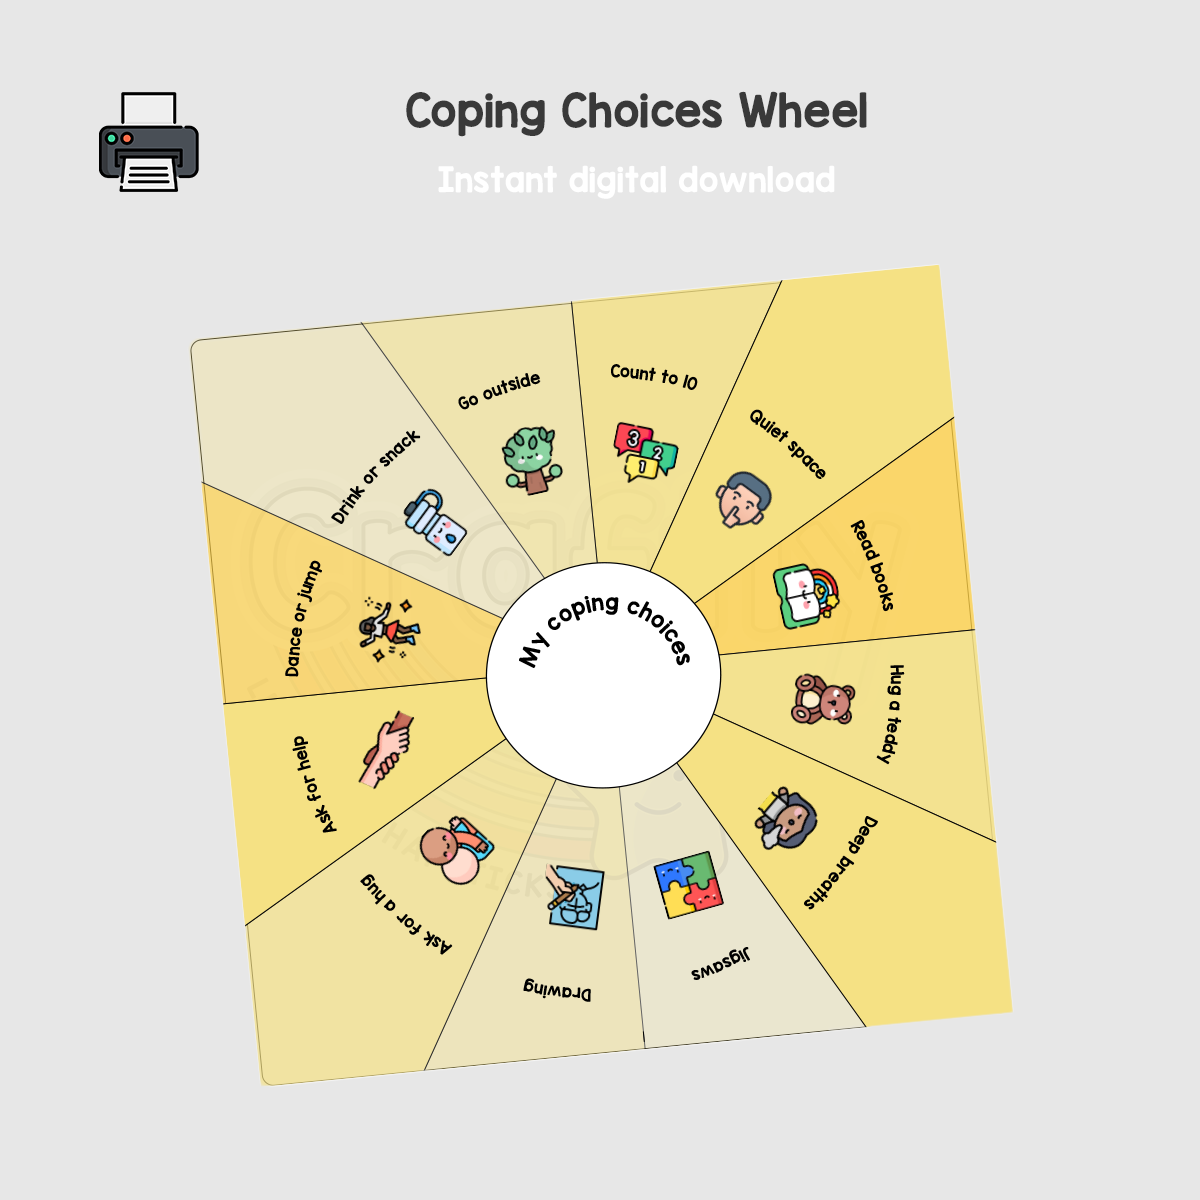 Coping Choices Wheel